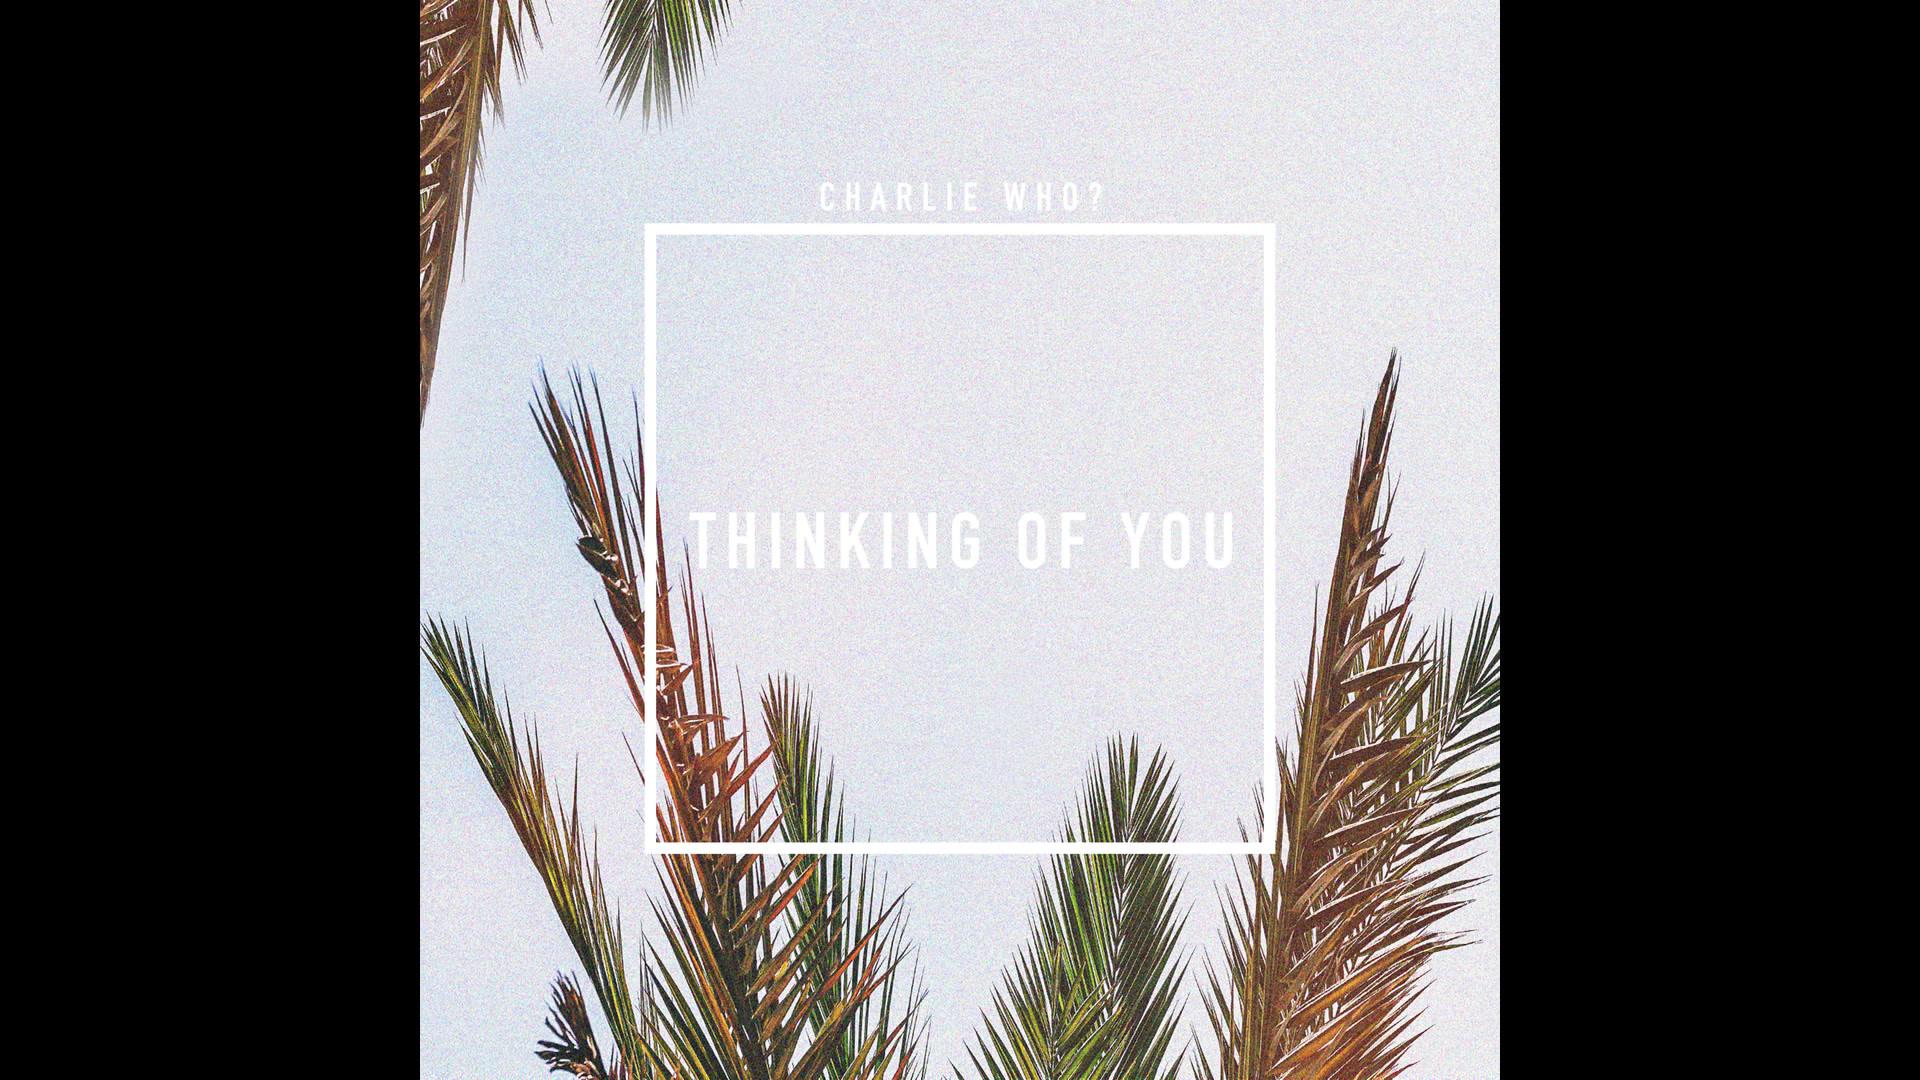 Charlie Who? - Thinking of You (Audio)